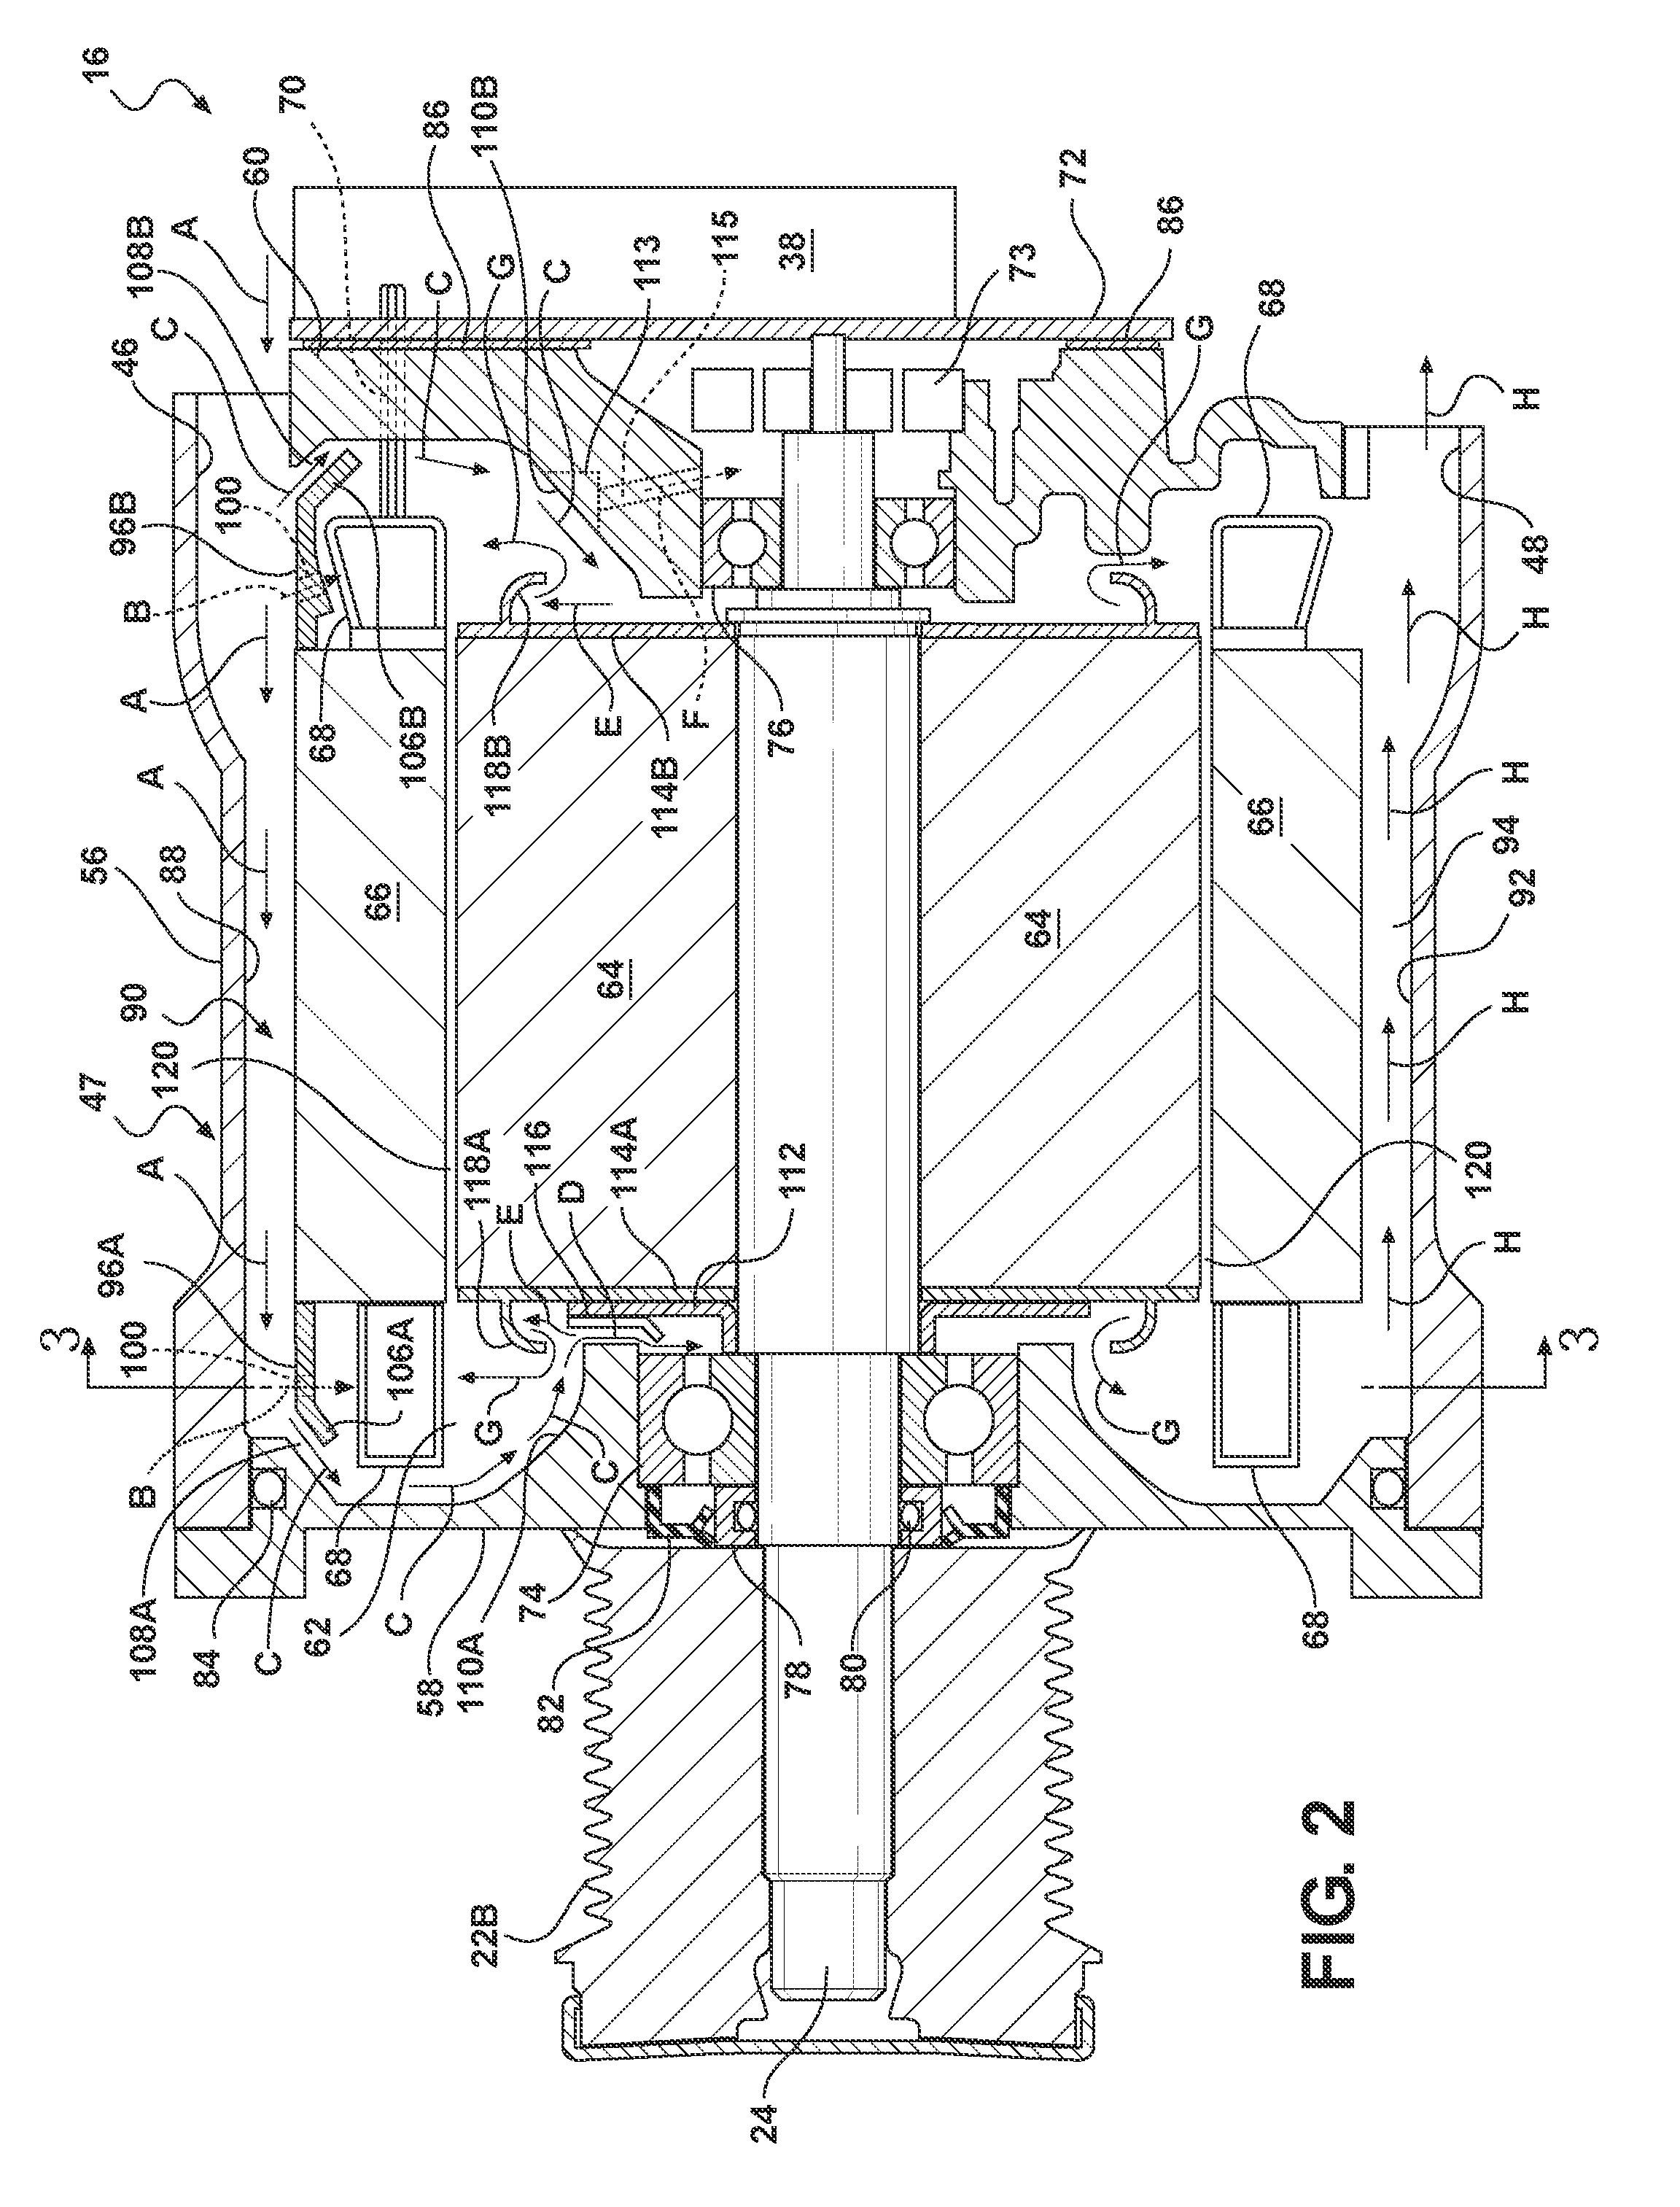 Oil cooled motor/generator for an automotive powertrain